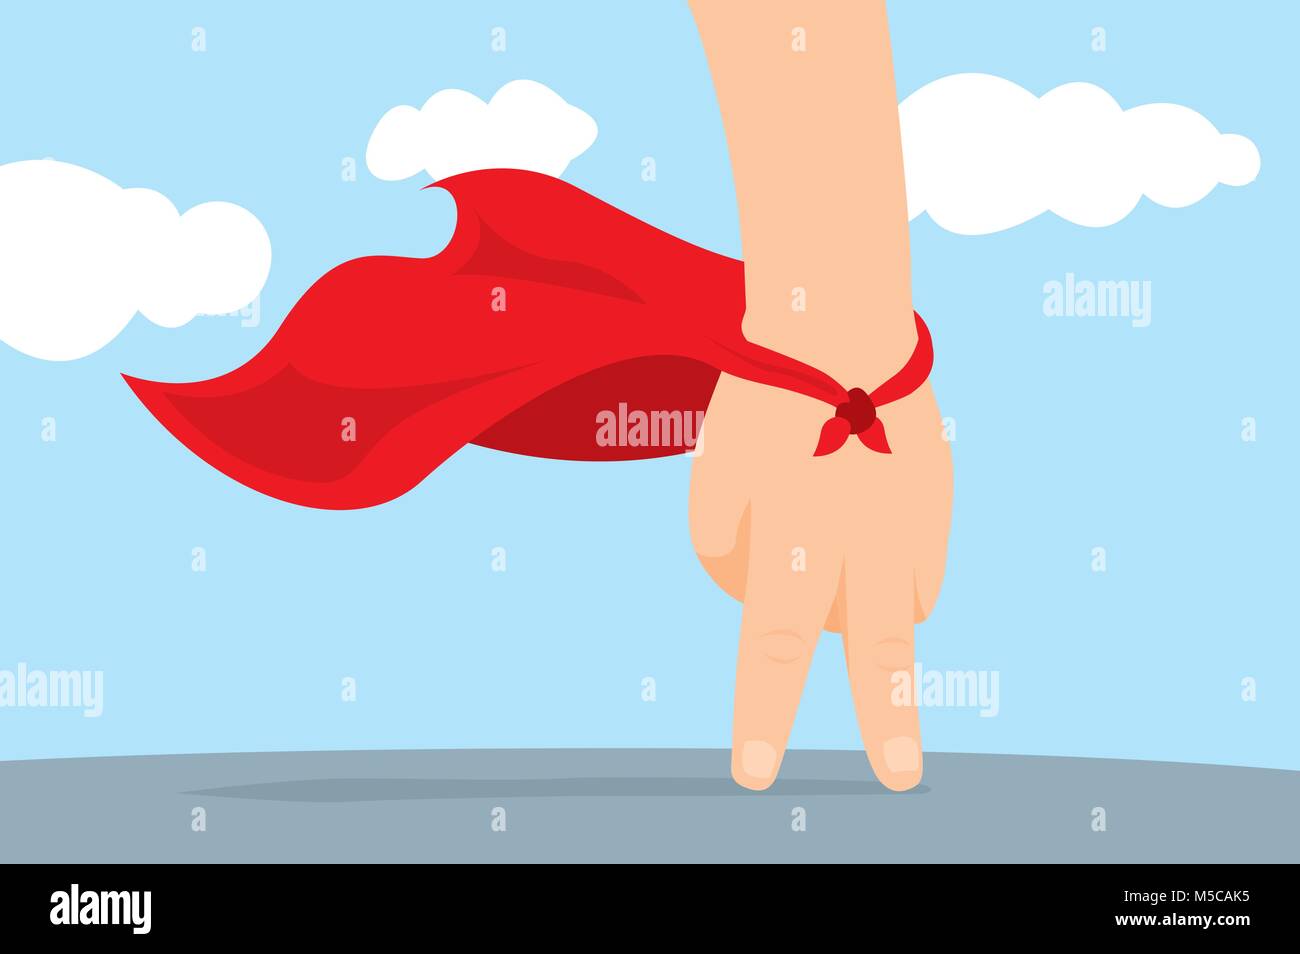 Cartoon illustration of playful hand super hero with cape Stock Vector